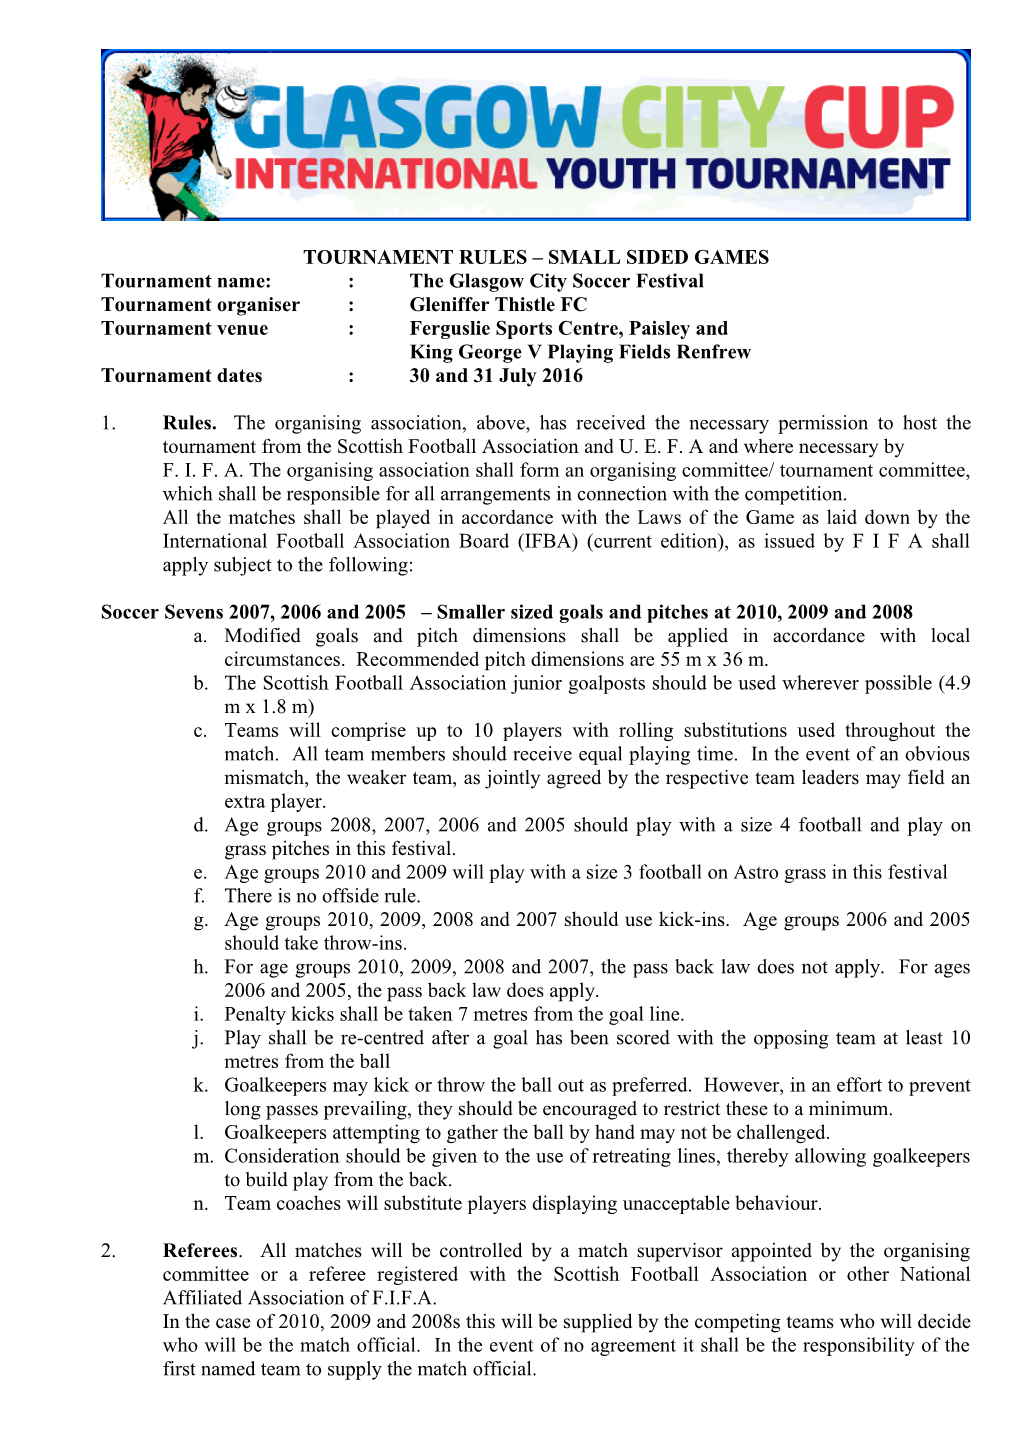 Tournament Rules Small Sided Games